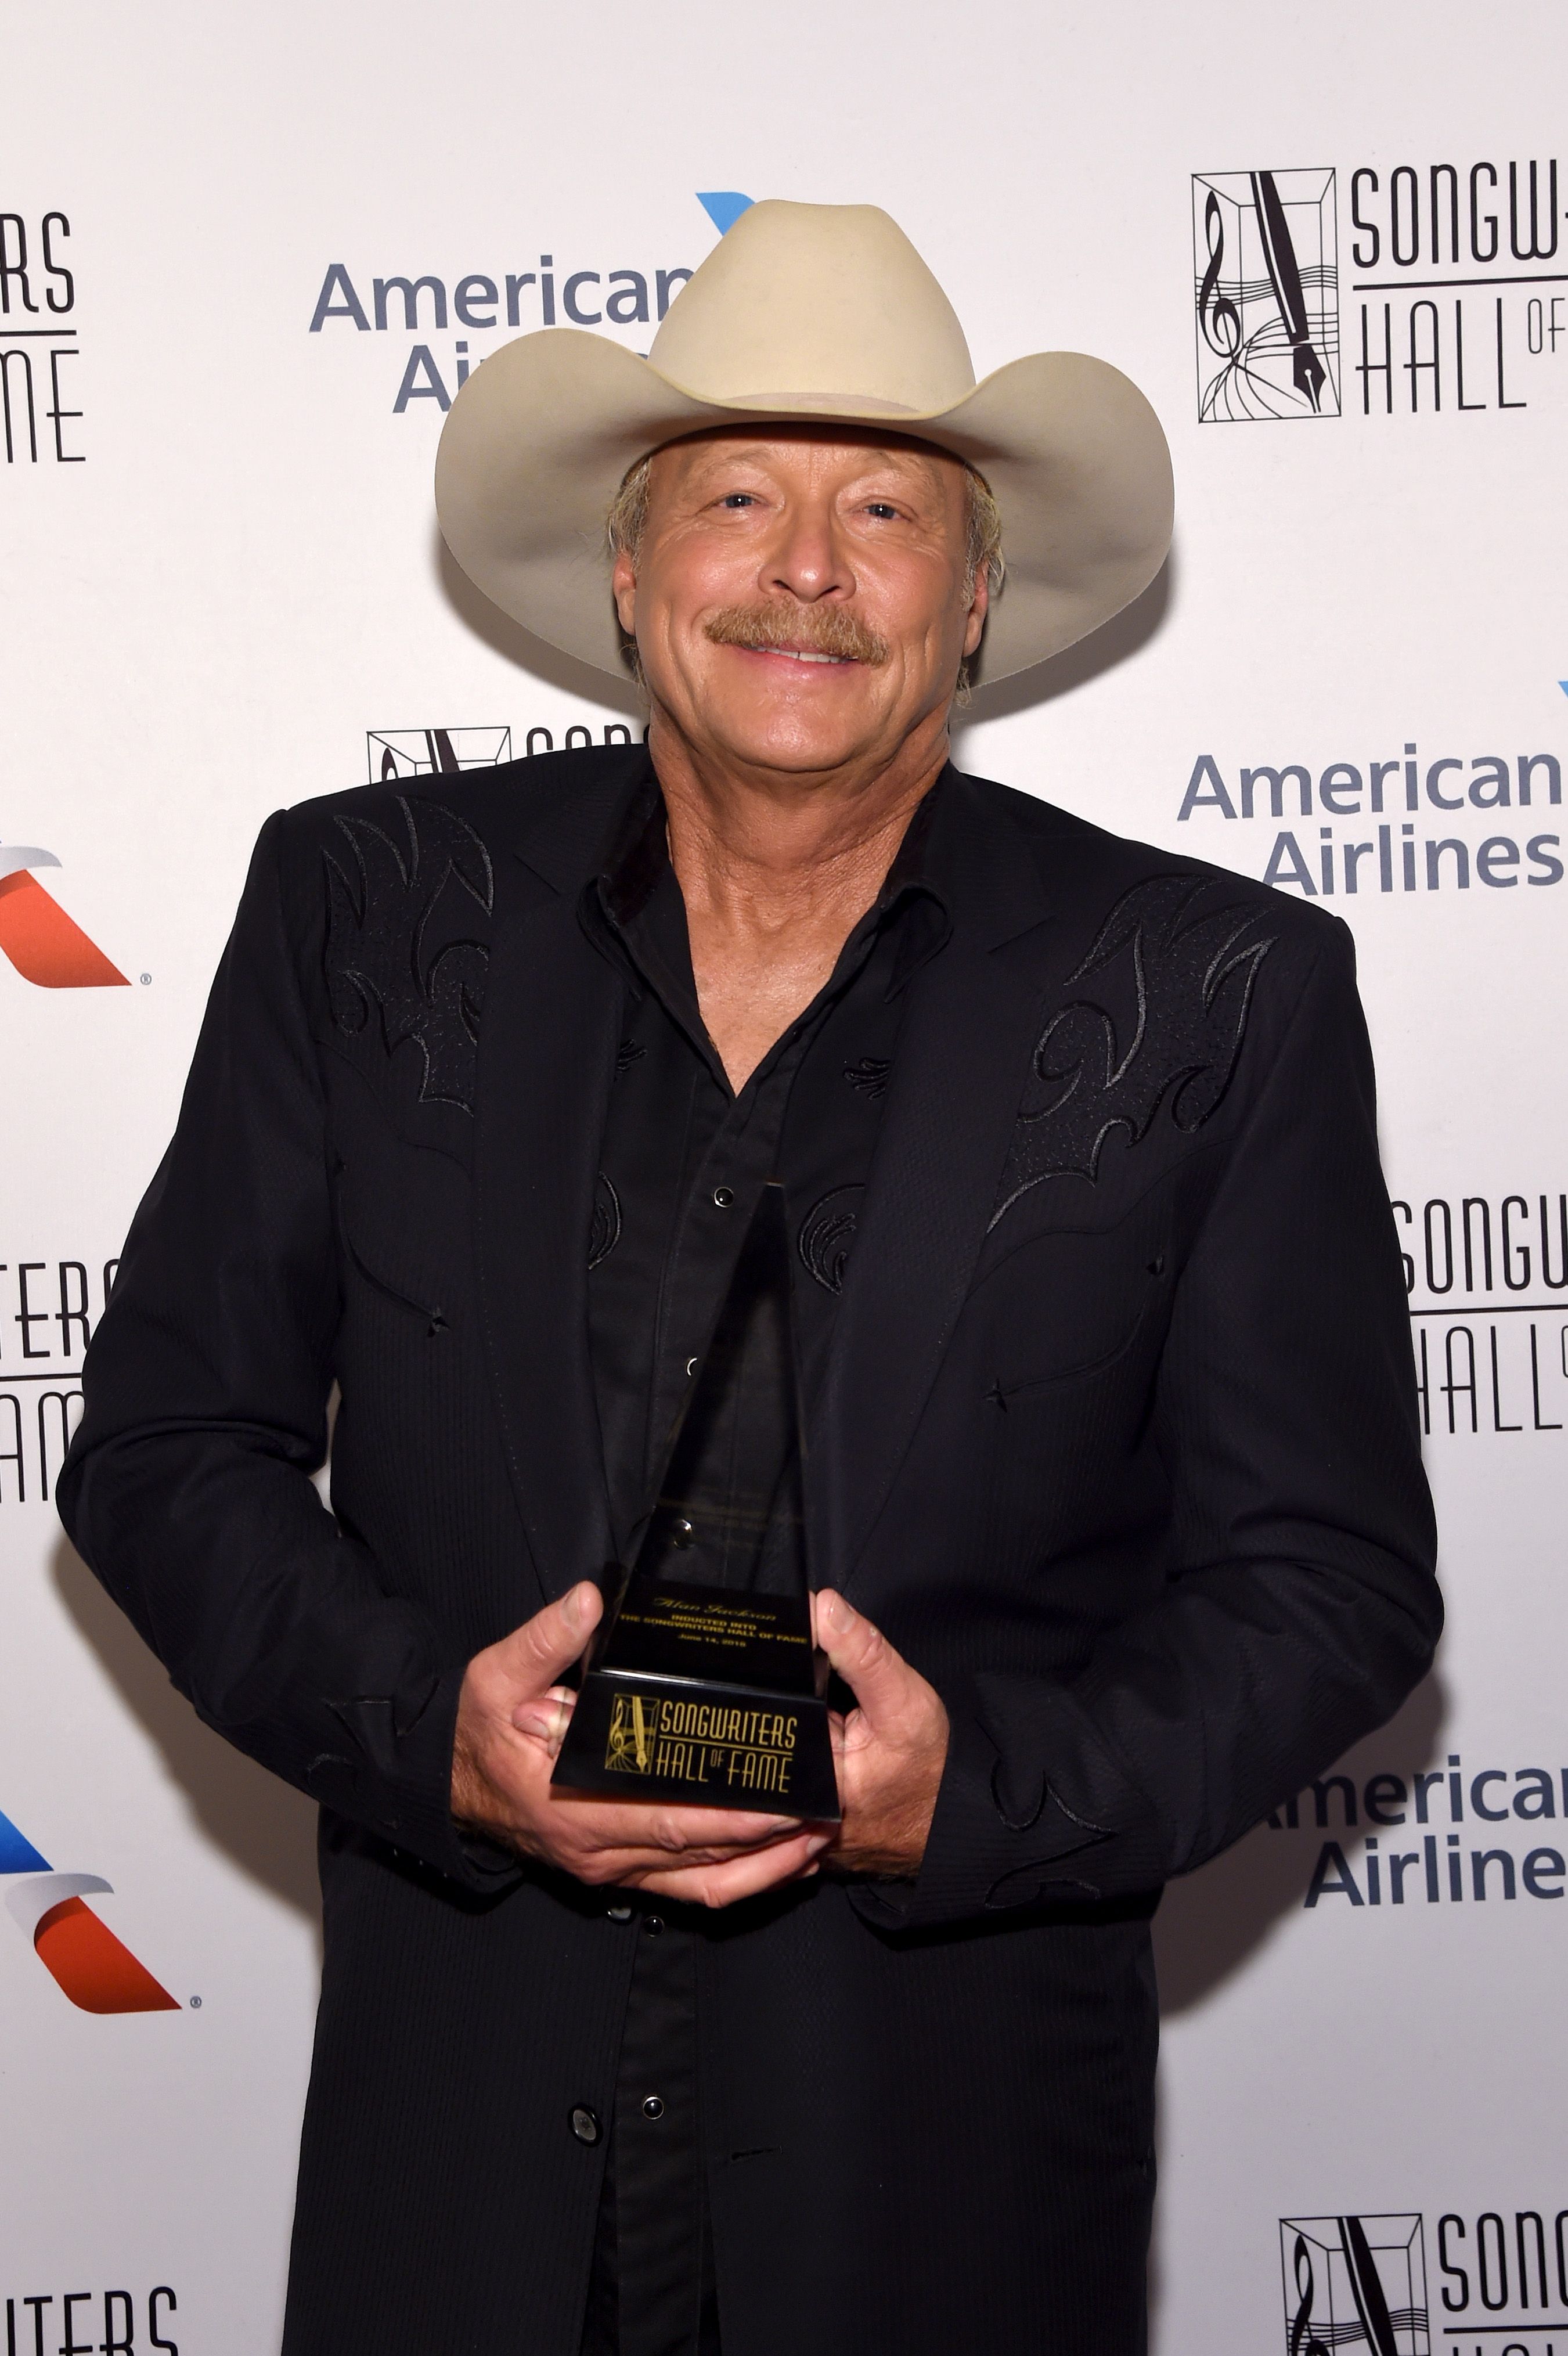 Alan Jackson during the Songwriters Hall of Fame 49th Annual Induction and Awards Dinner at New York Marriott Marquis Hotel on June 14, 2018, in New York City. | Source: Getty Images